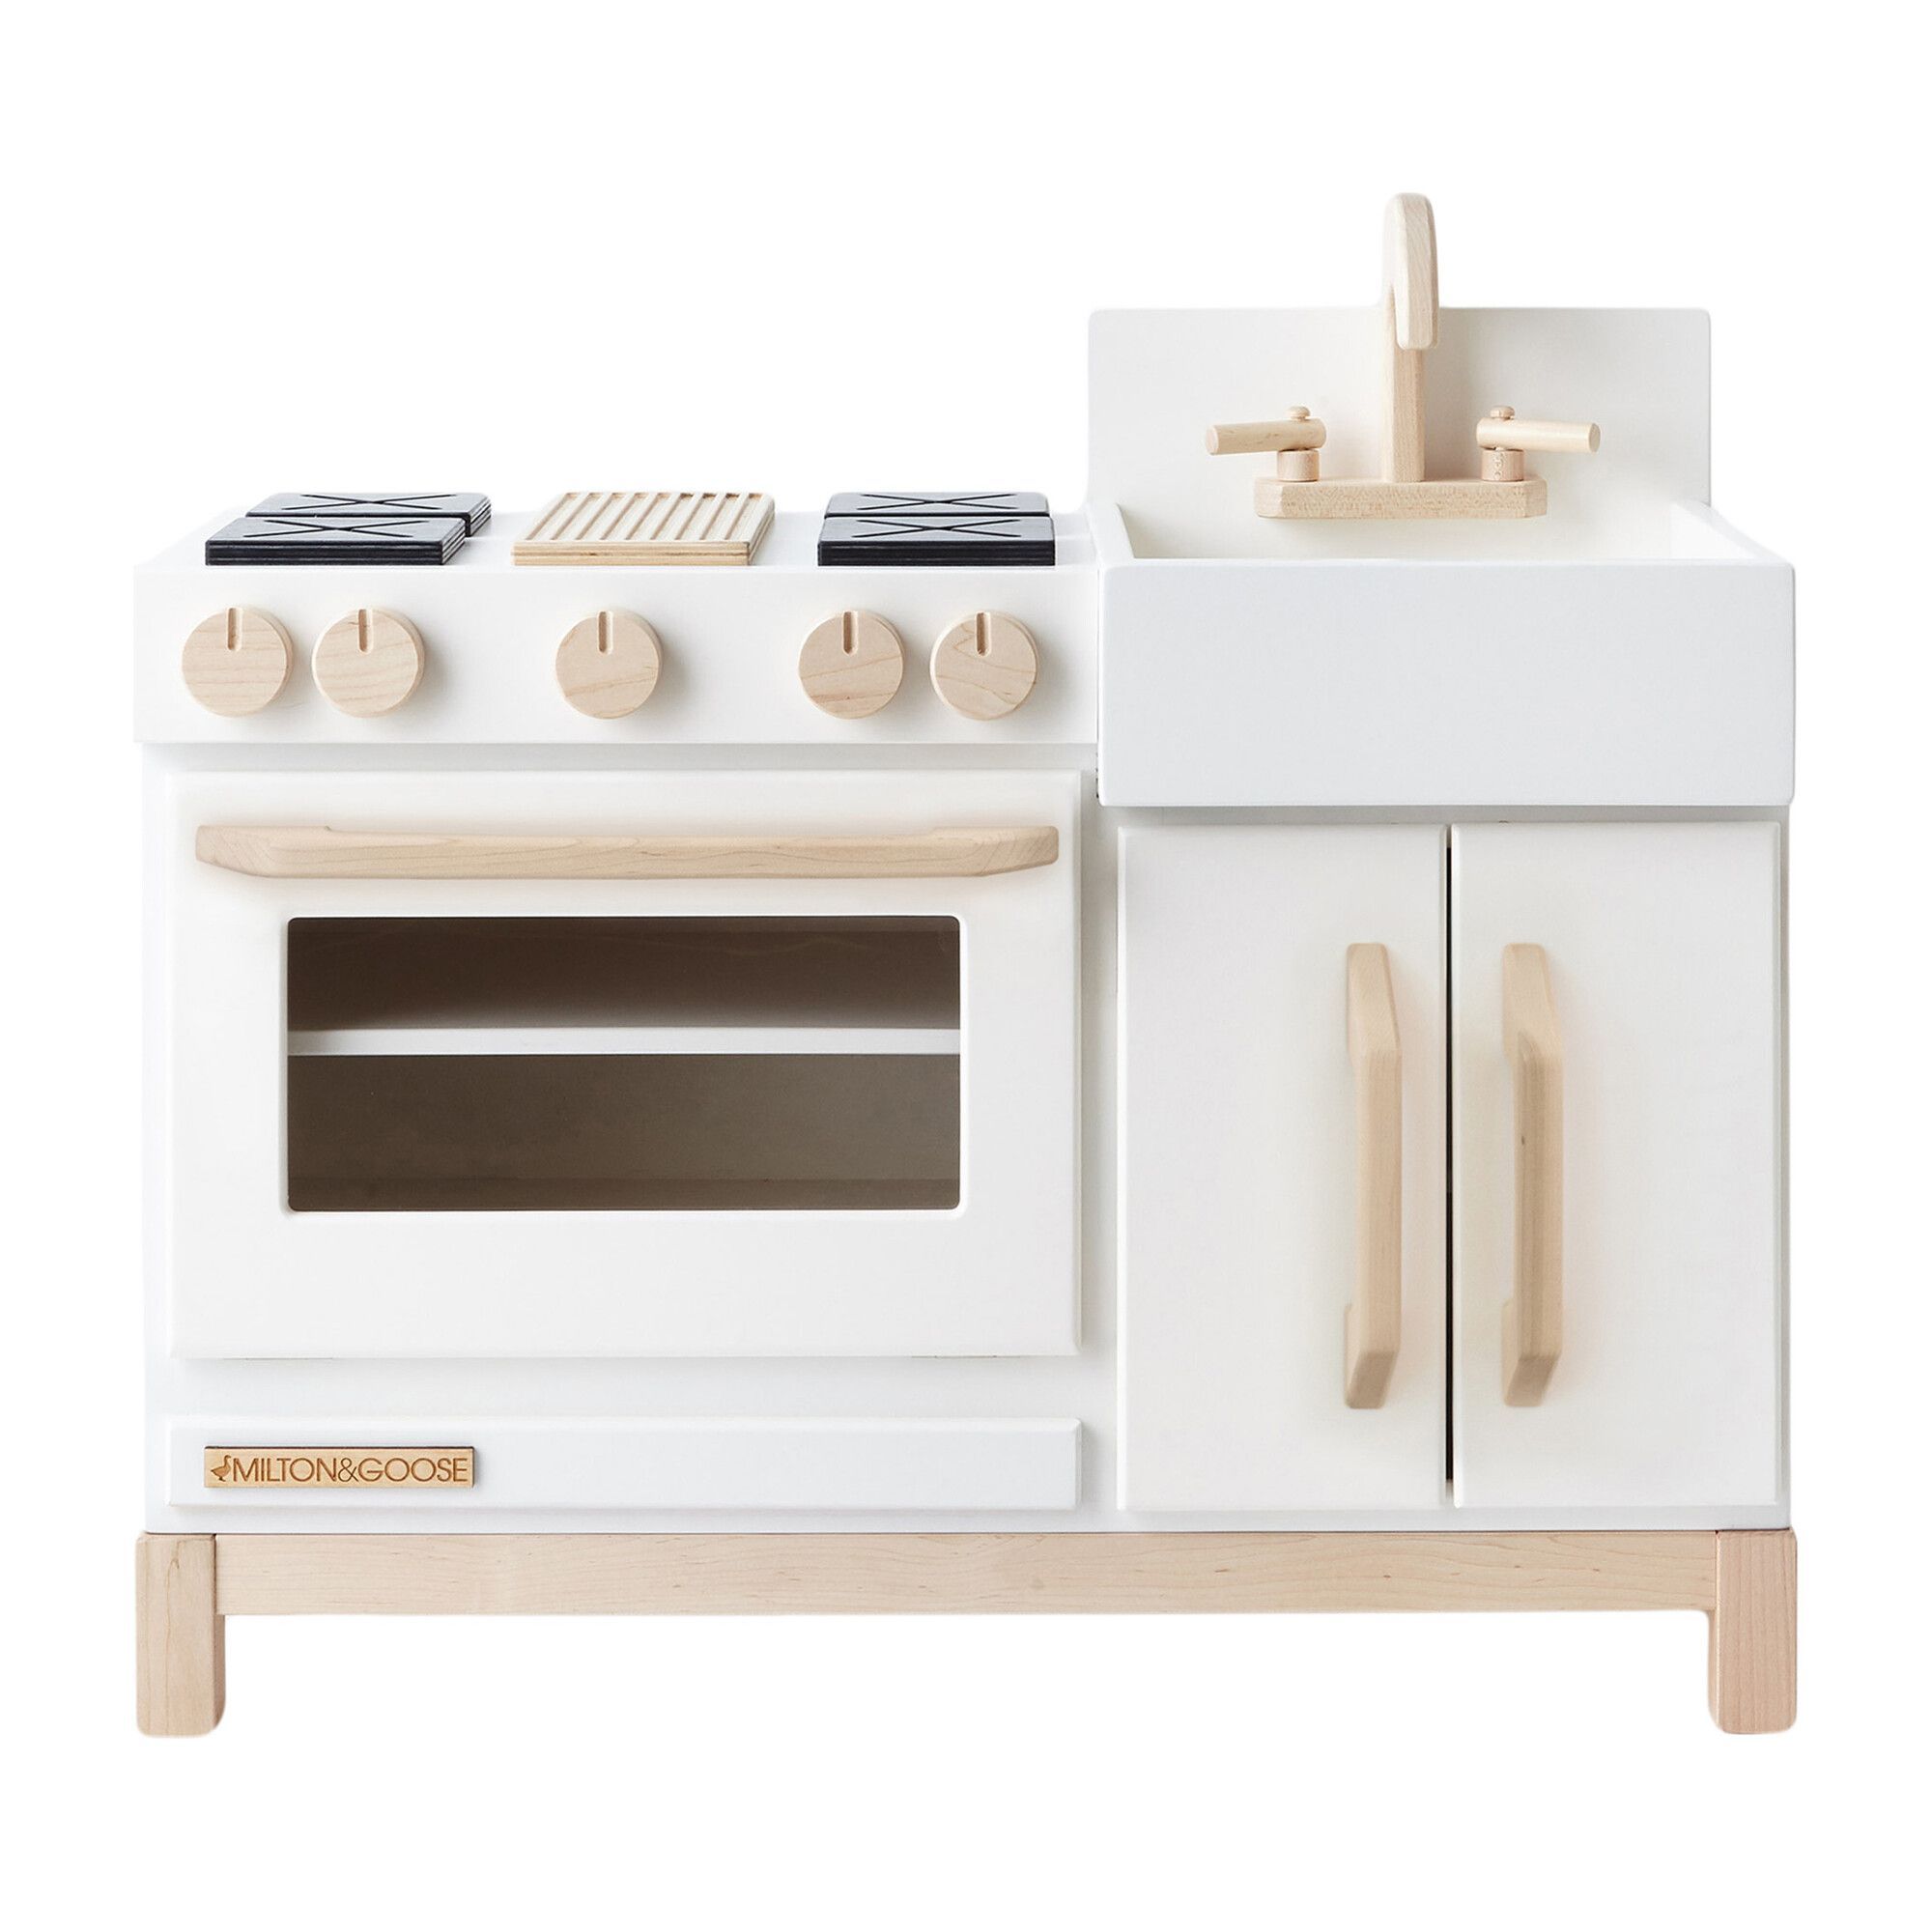 12 Best Play Kitchens For Kids 2021 Play Kitchen Sets